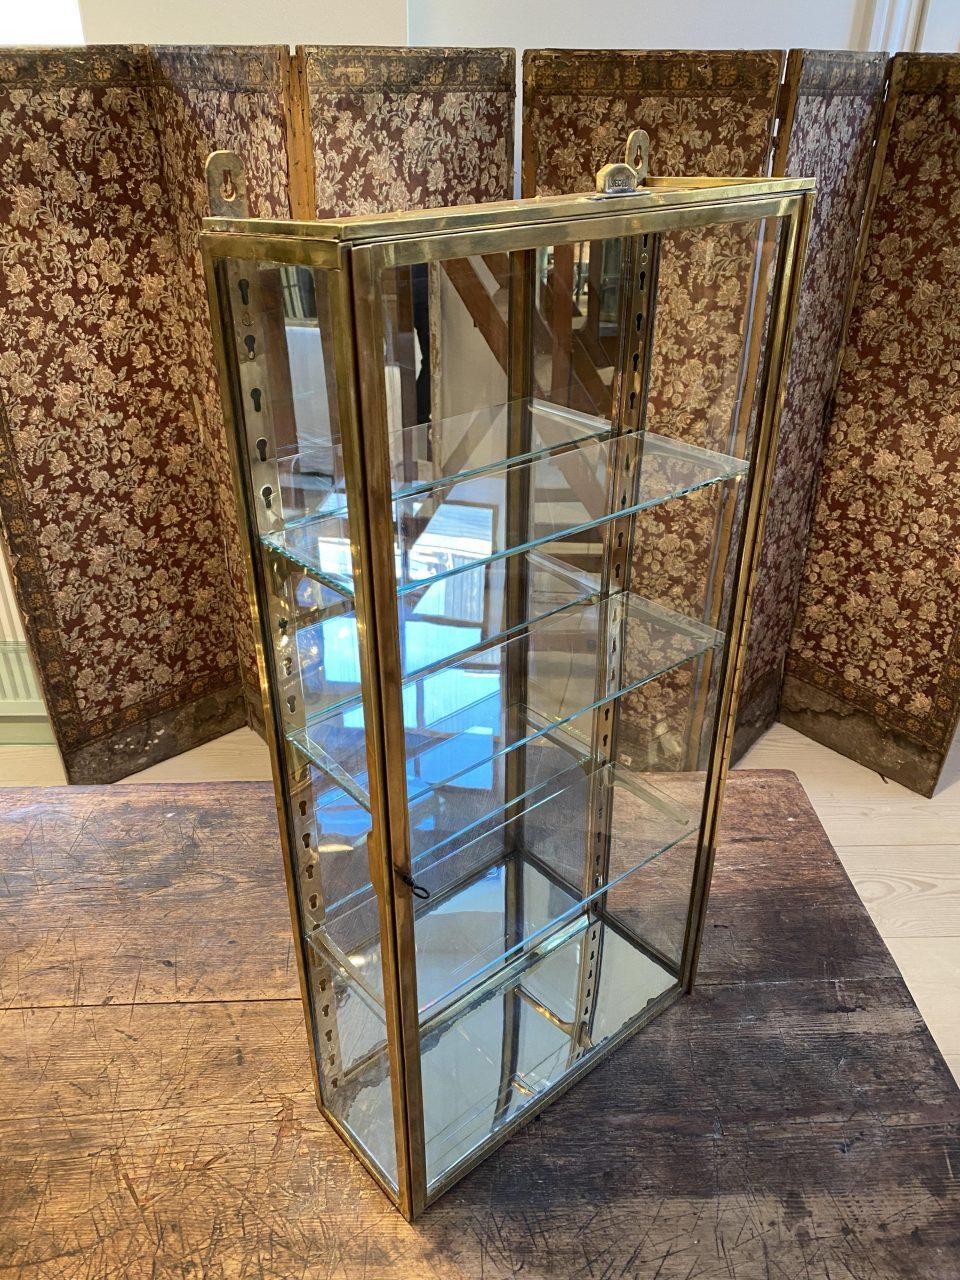 Handsome and very presentable vintage brass display cabinet / vitrine, from Art Deco 1930s France. Comes with its associated key, 3 glass shelves, and adjustable shelf brackets. Earlier boutique inventory, produced by the renowned Siègel, and in